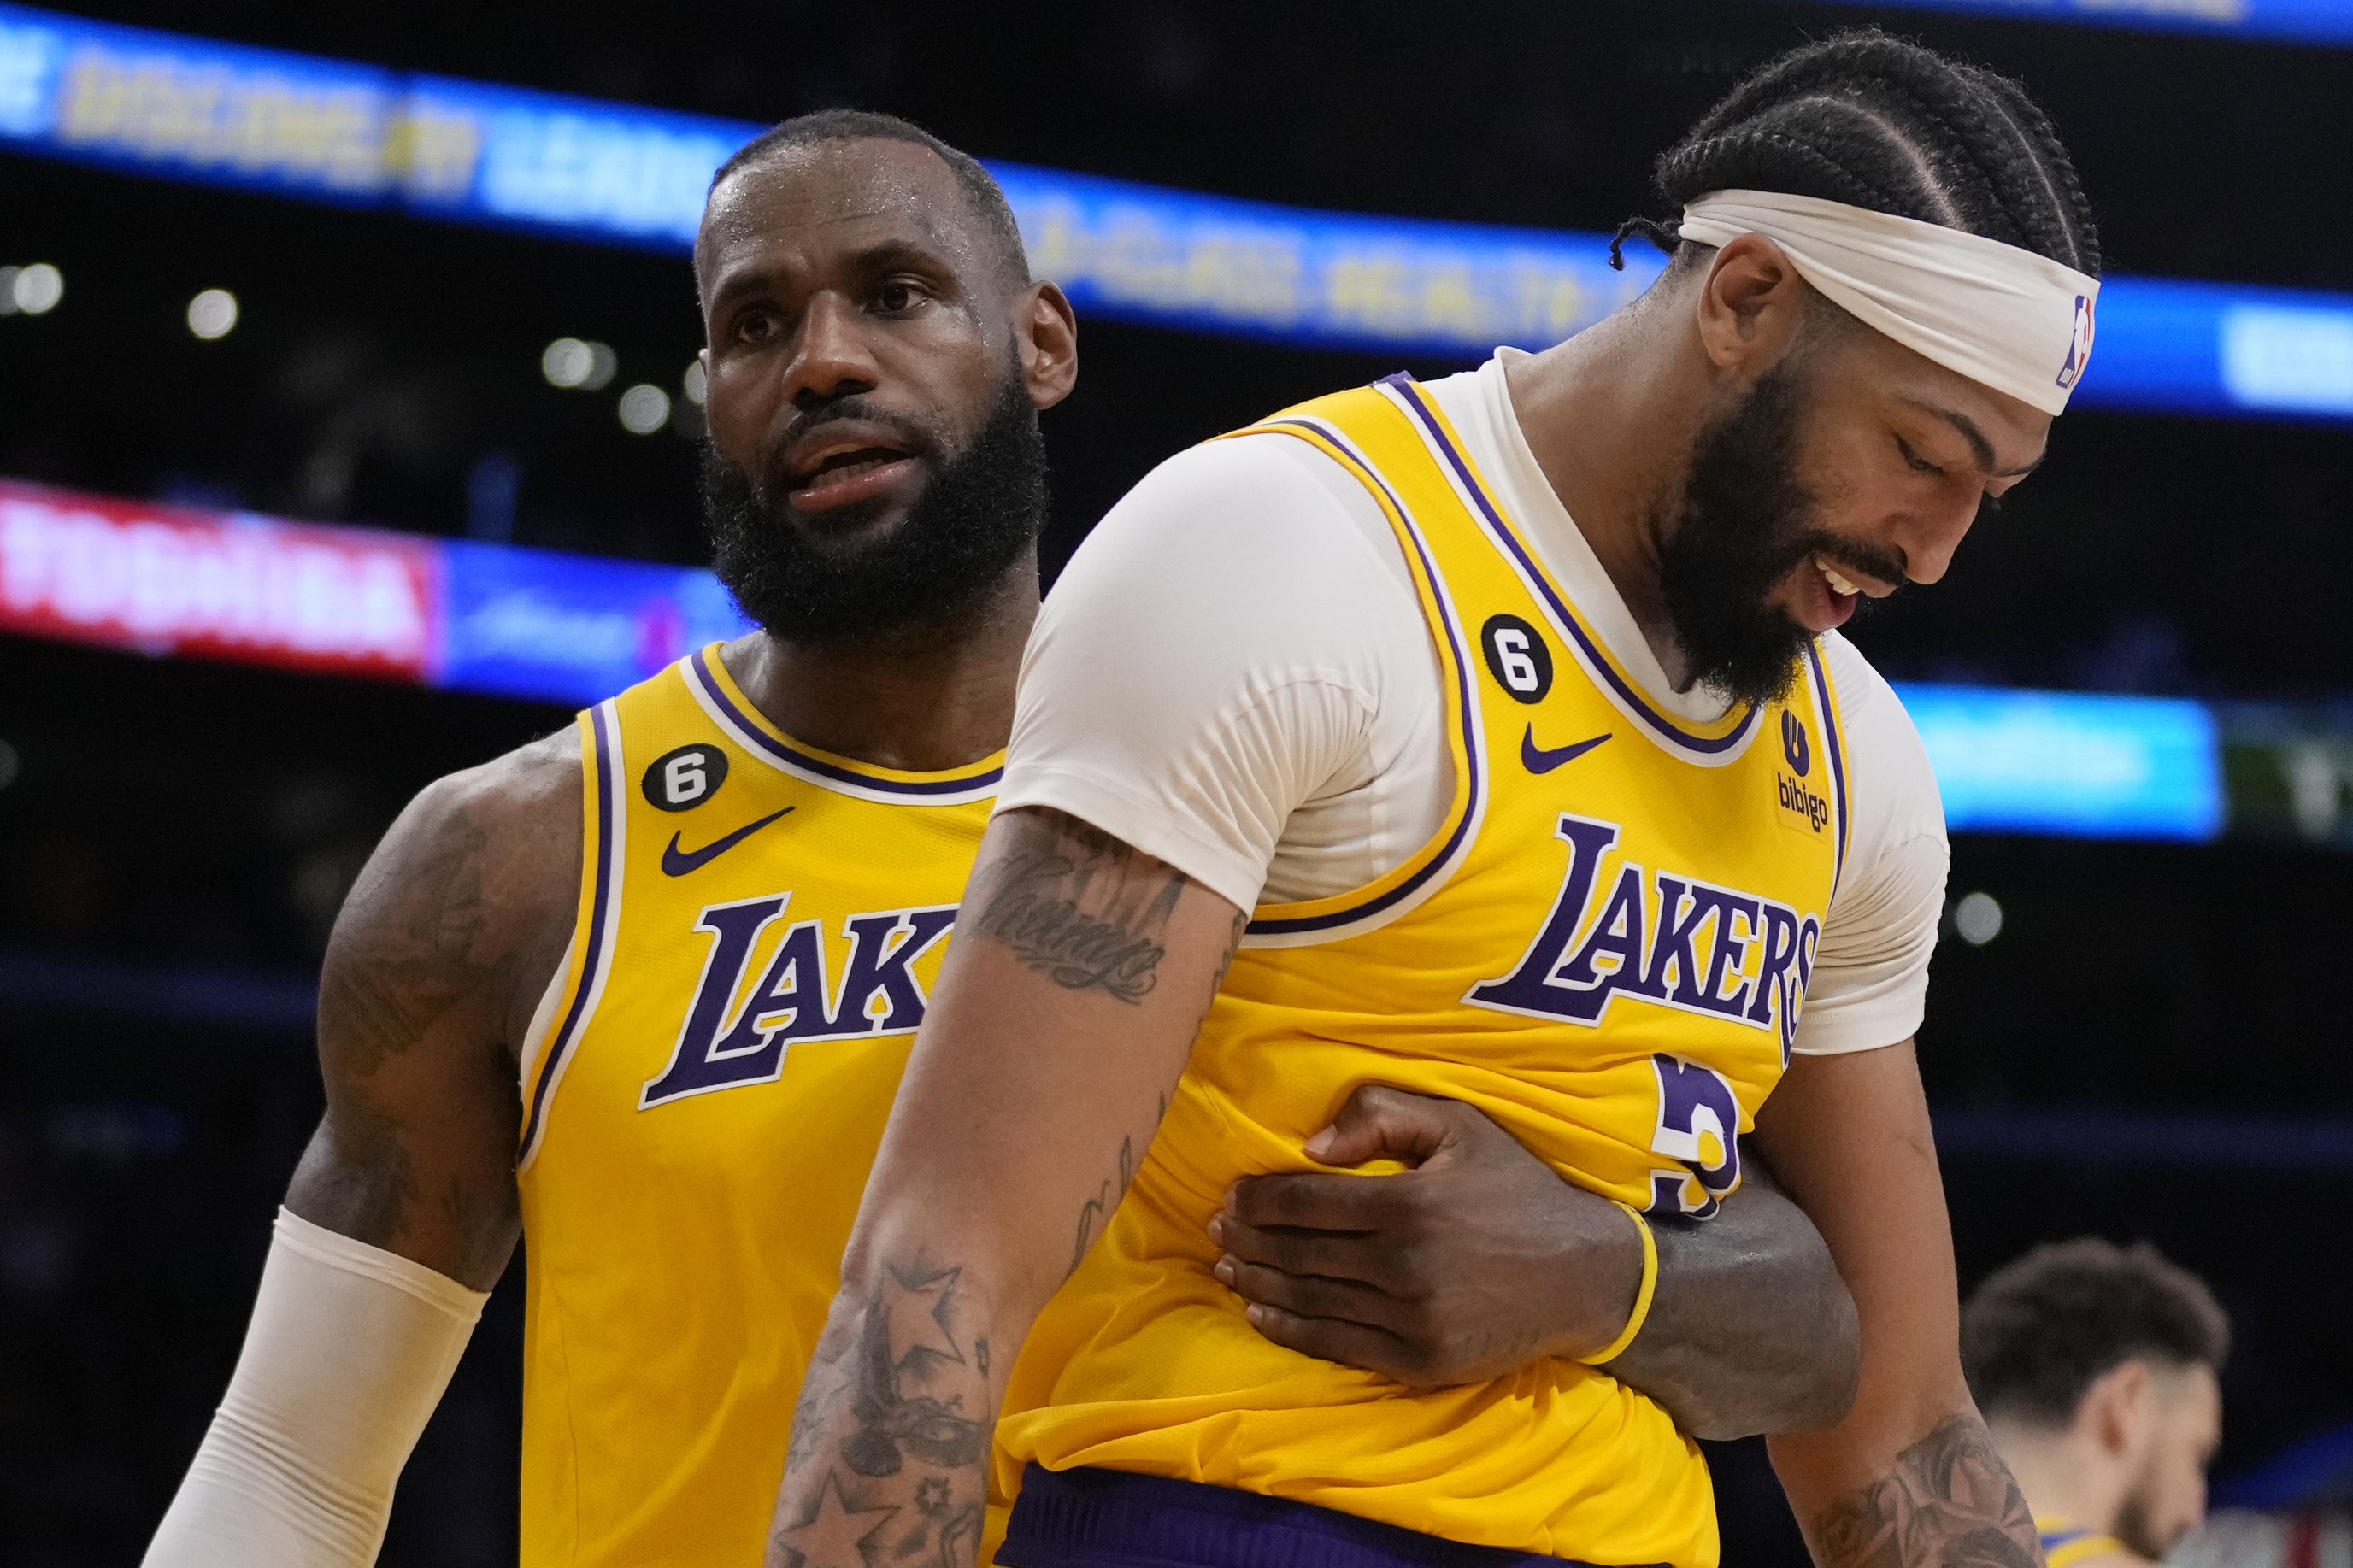 Los Angeles Lakers forward LeBron James, left, hugs forward Anthony Davis during the second half in Game 6 of an NBA basketball Western Conference semifinal series against the Golden State Warriors Friday, May 12, 2023, in Los Angeles. (AP Photo/Ashley Landis)